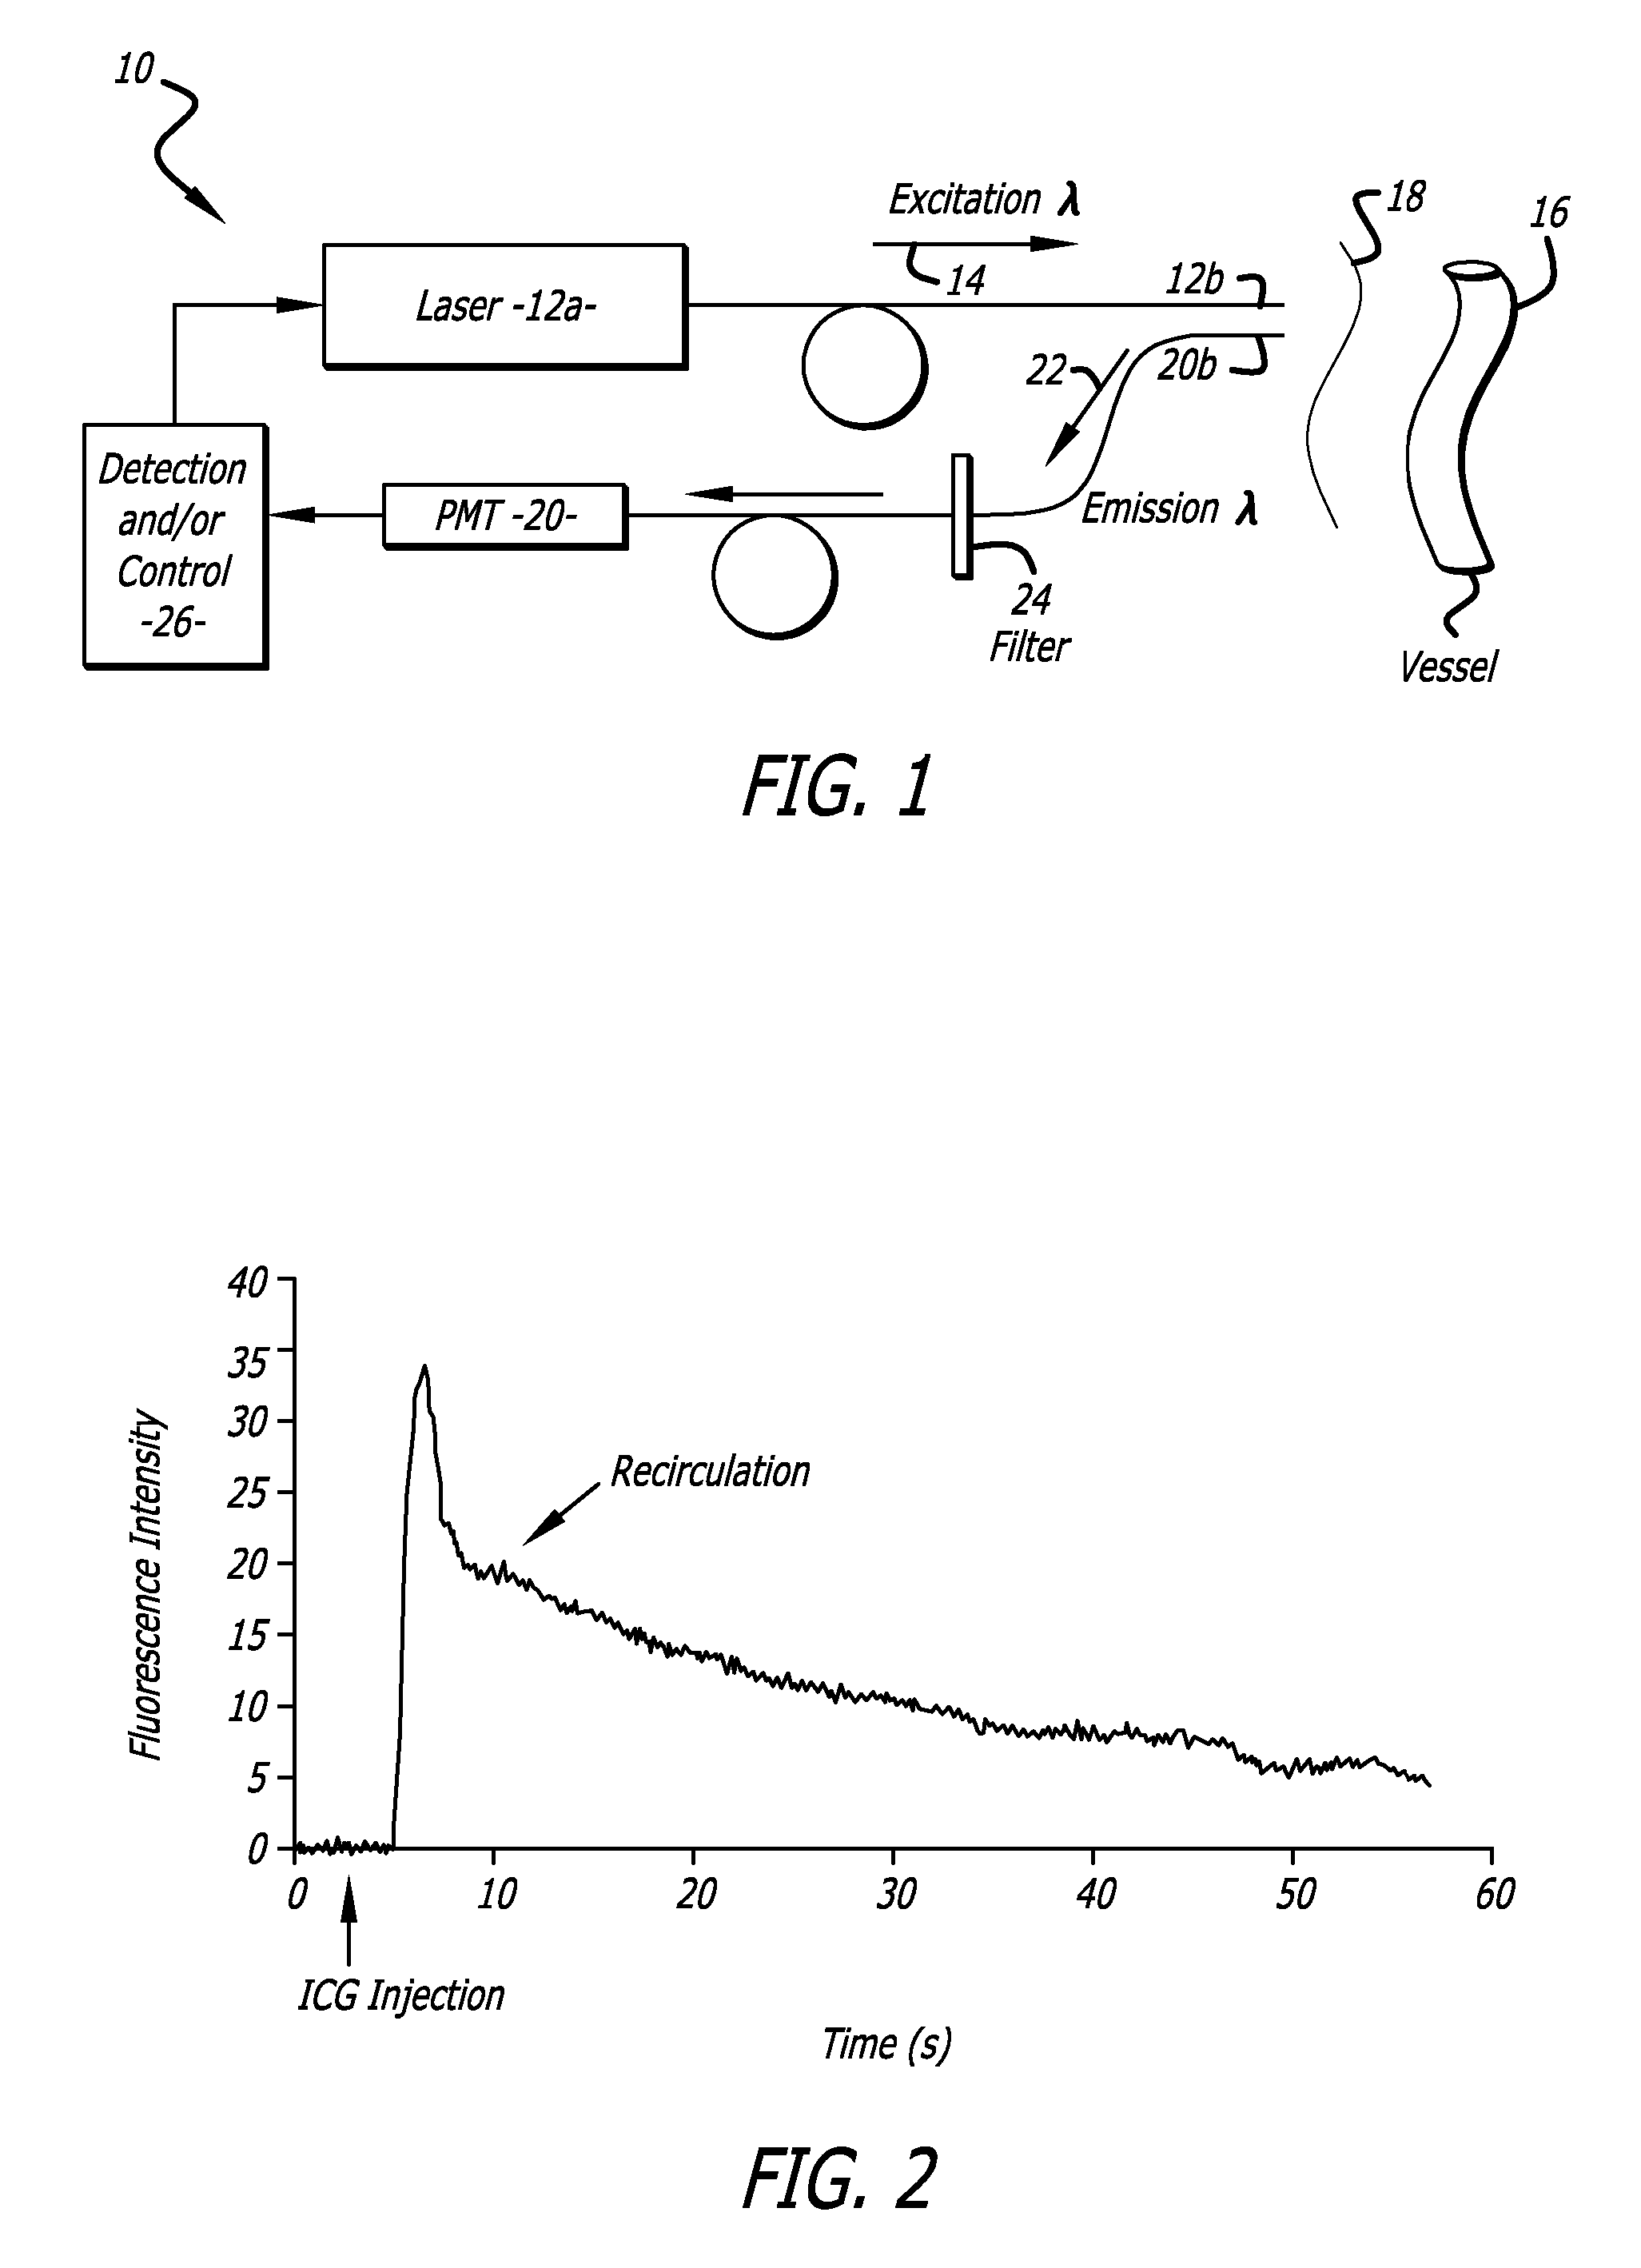 Method for dye injection for the transcutaneous measurement of cardiac output